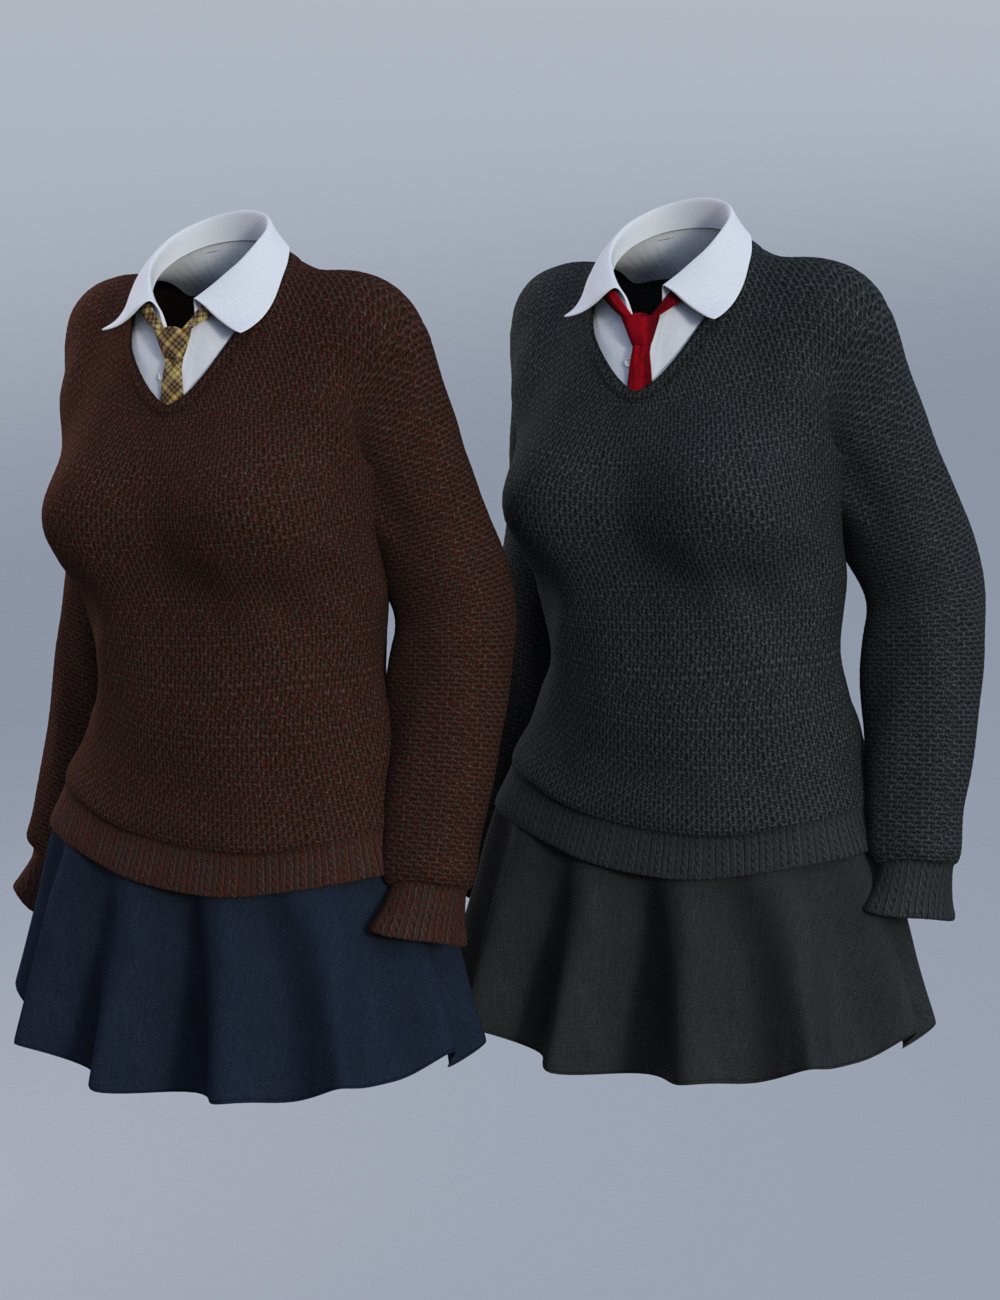 New Semester Outfit for Genesis 3 Female(s) by: tentman, 3D Models by Daz 3D